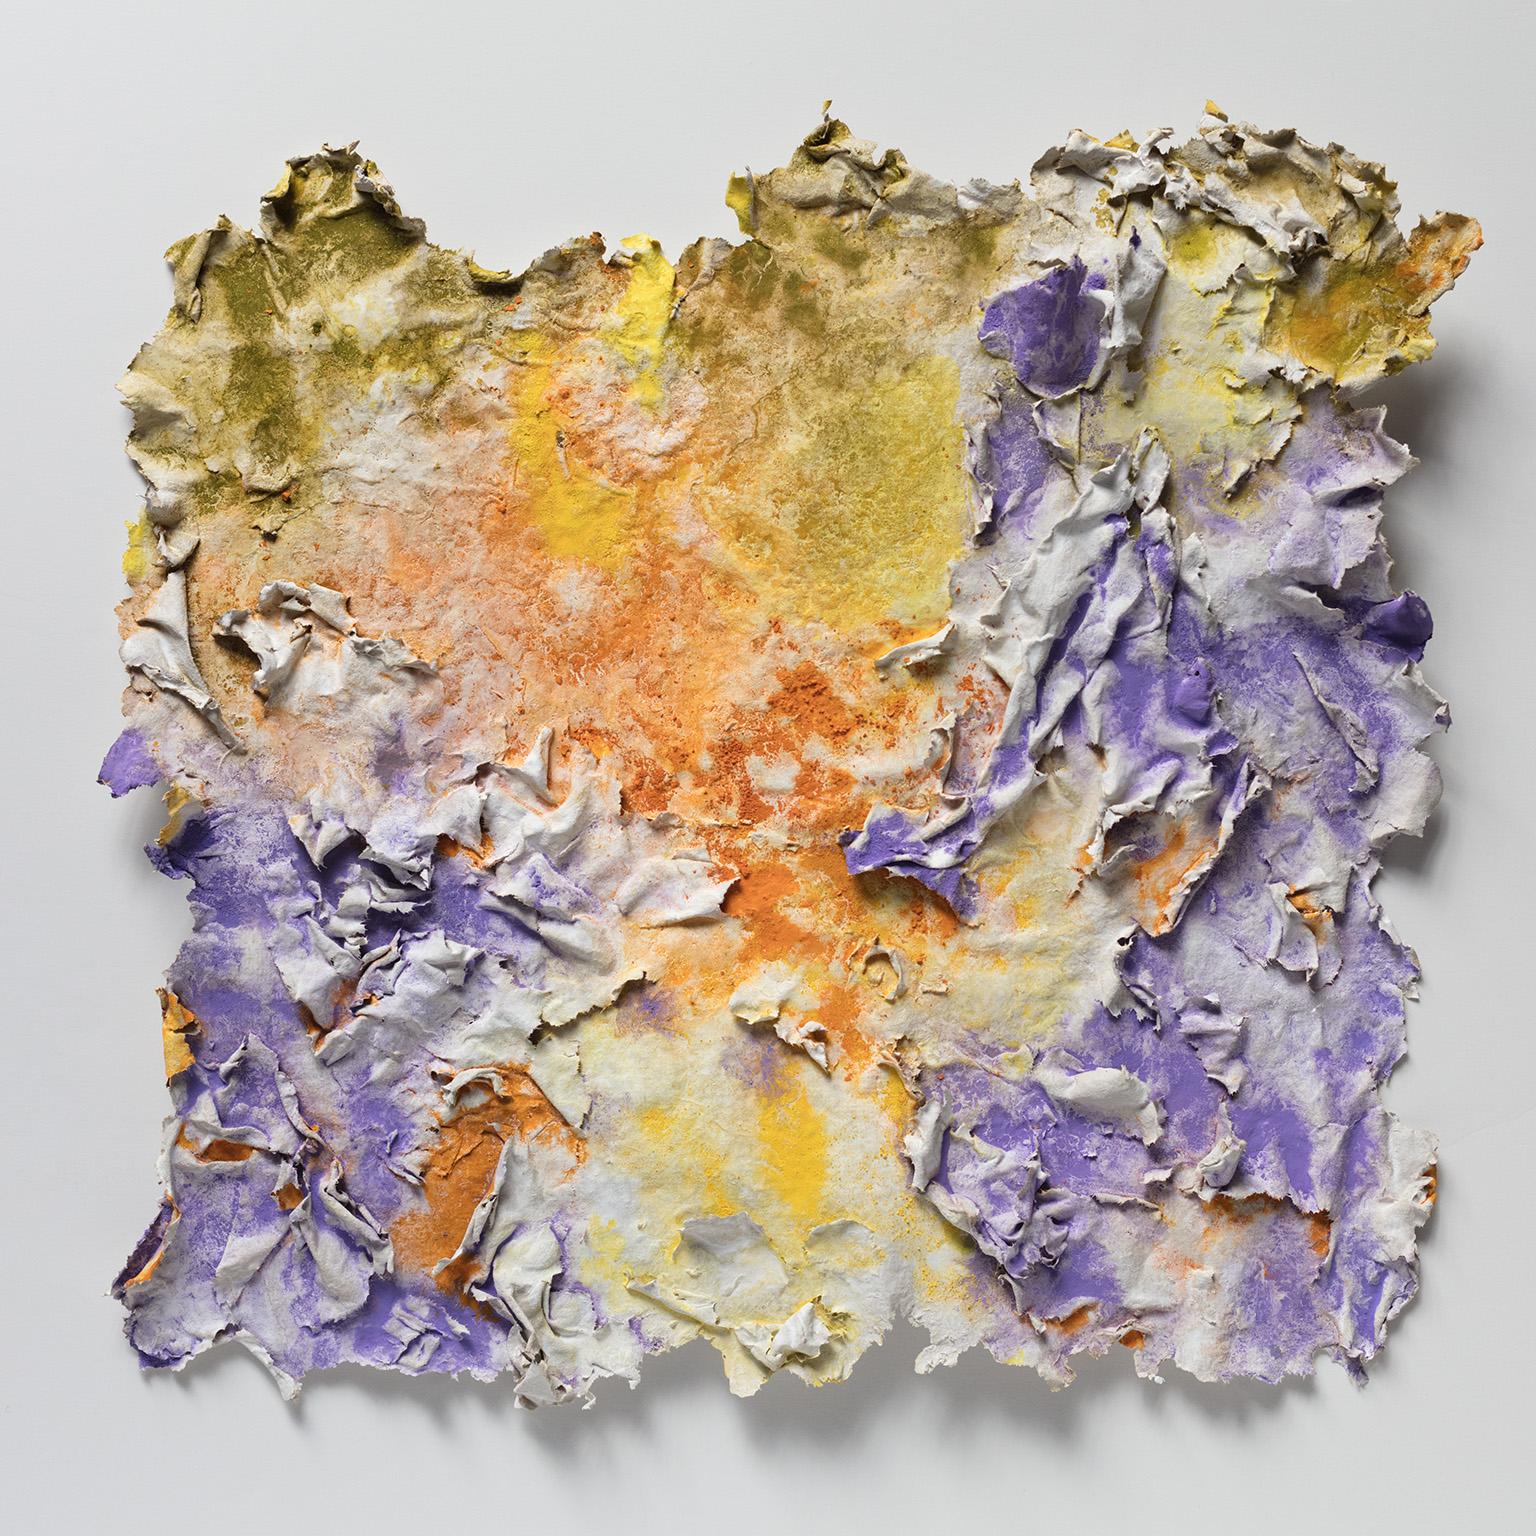 Solstitium (Summer Solstice) - Small Abstract Orange and Purple Work on Paper